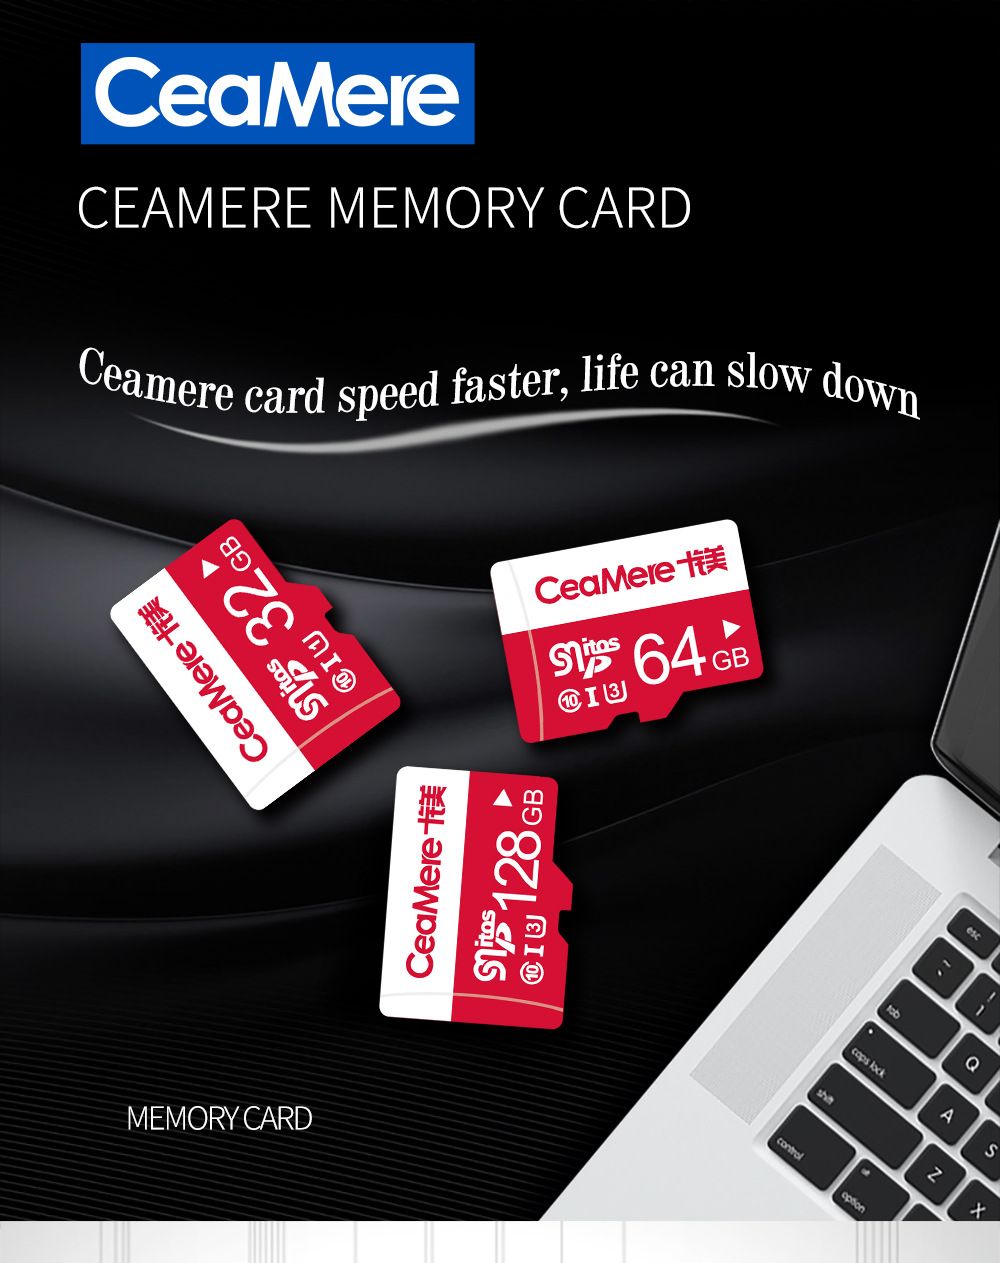 CEAMERE-SMITOSP-32G-U1-Waterproof-Professional-High-Speed-Memory-Card-For-Mobile-Phone-DVR-IP-Camera-1497384